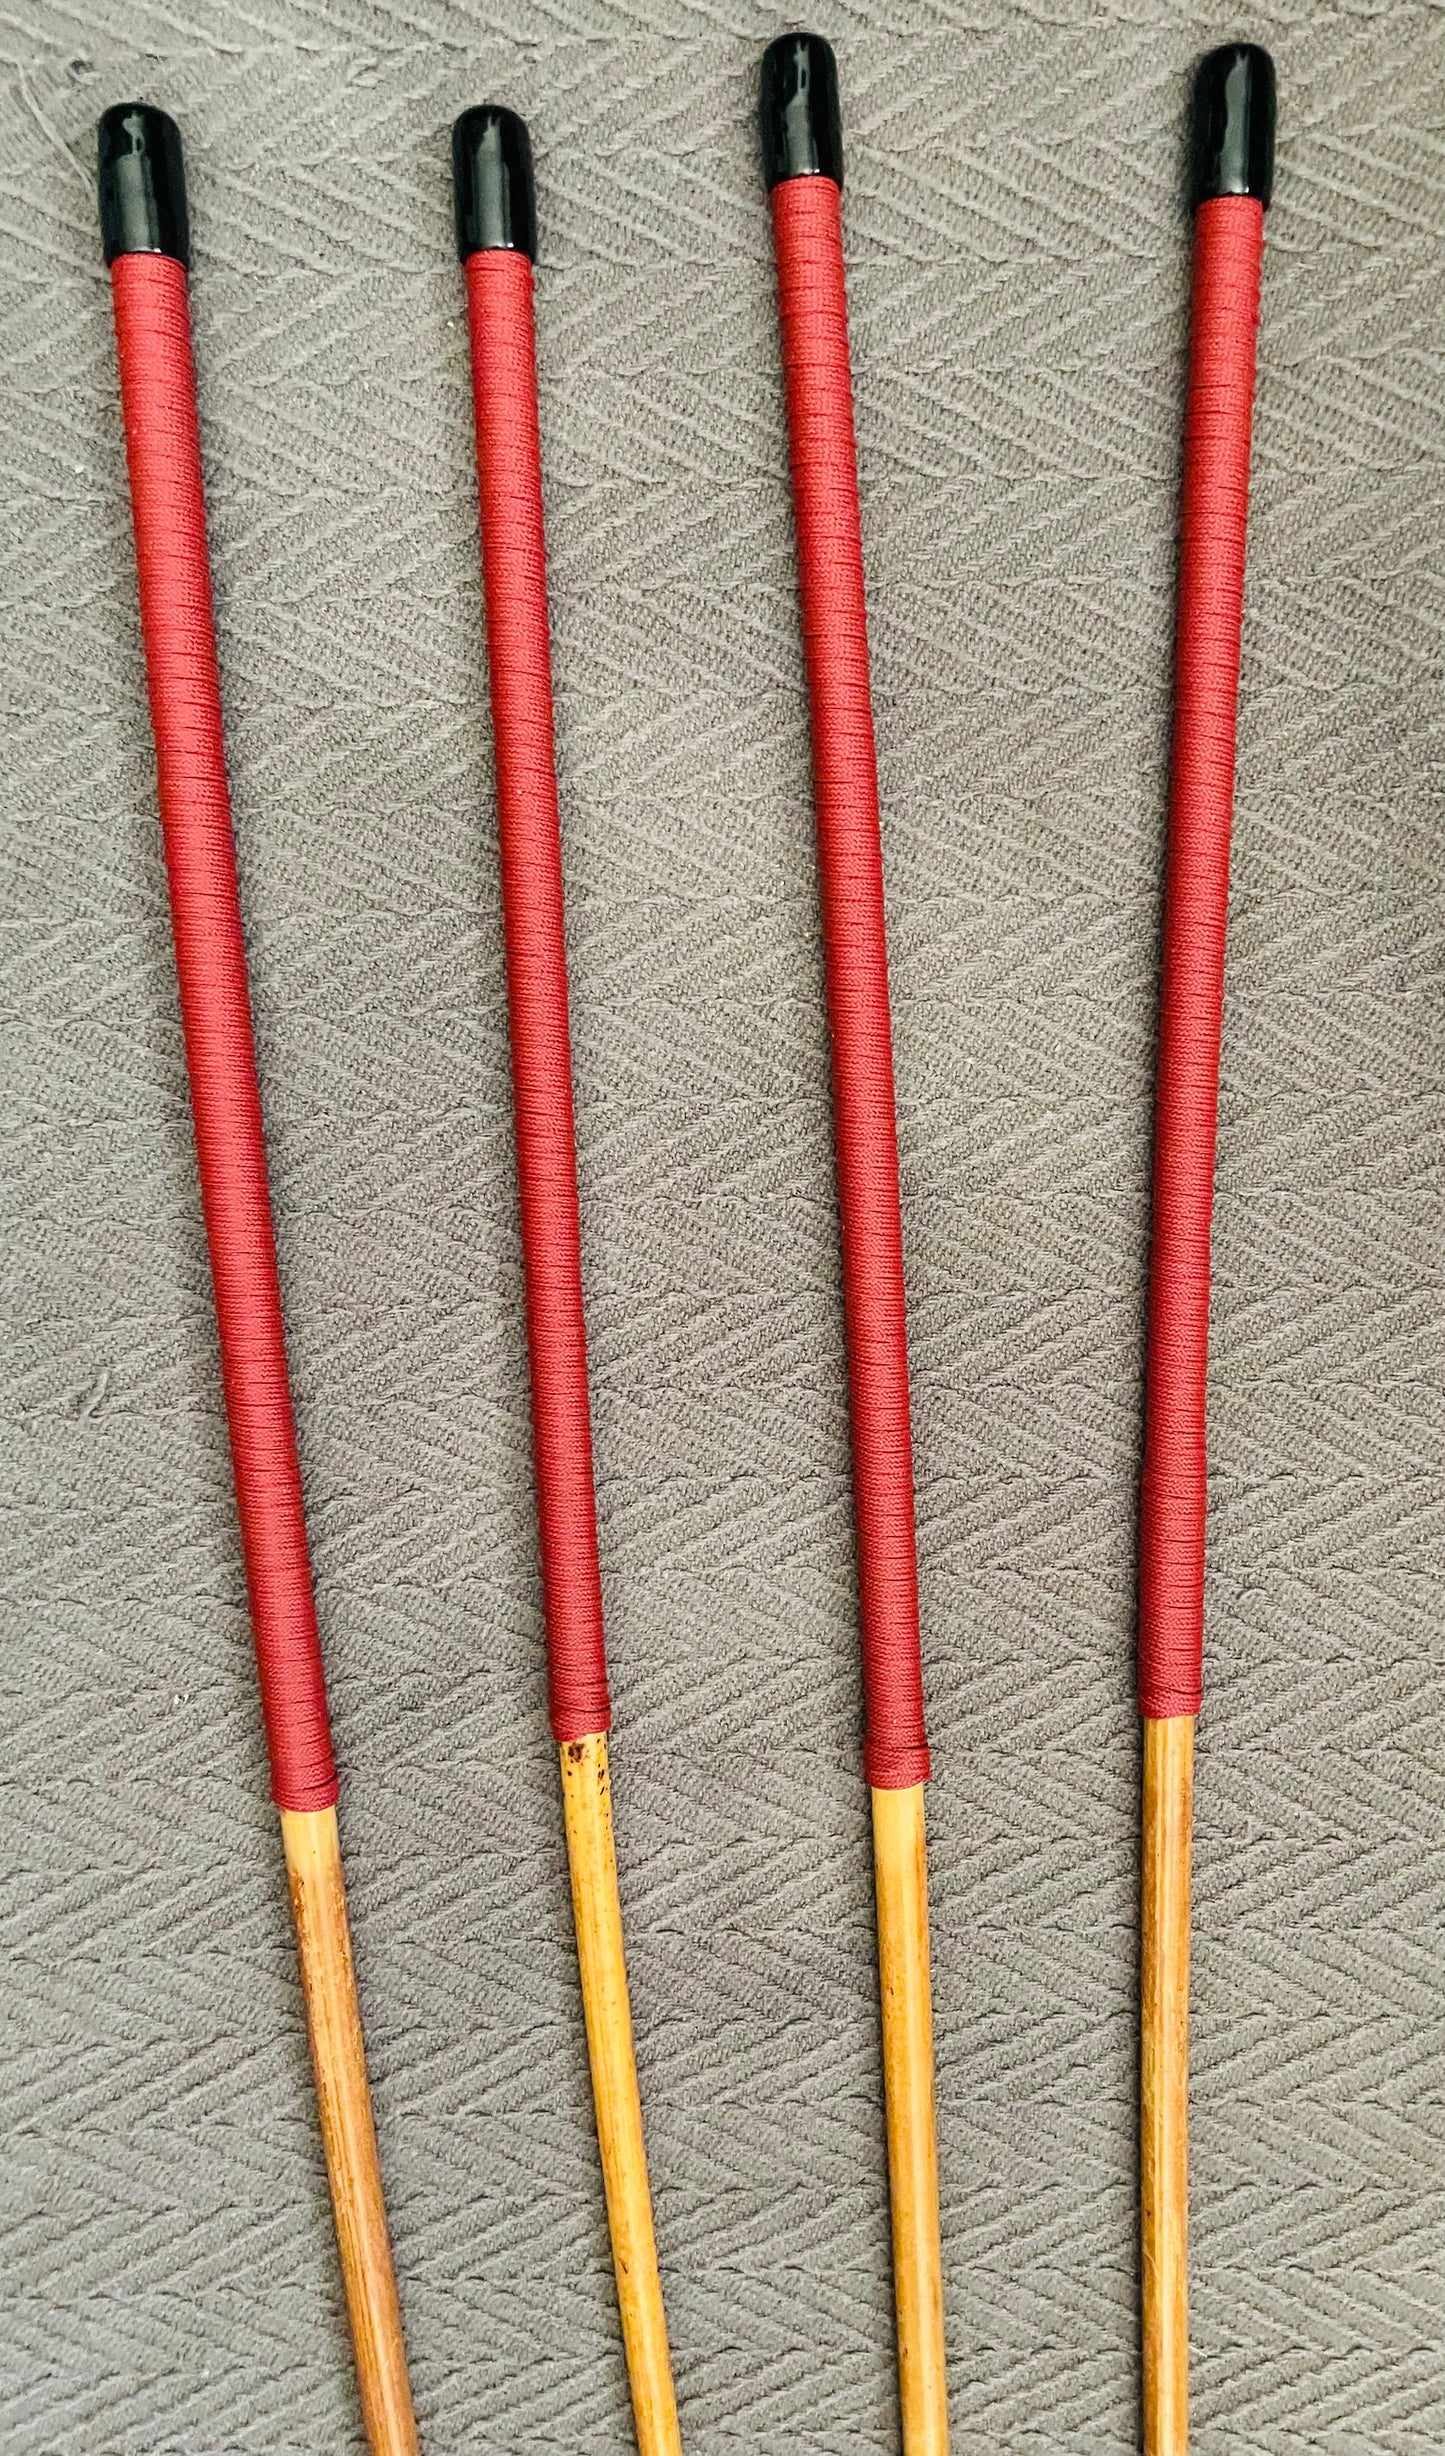 Knotless Golden / Honey Smoked Dragon Canes / Ultimate Golden Dragon Canes Set of 4 - 90 to 92 cms L & 8 - 11.5 mm D - 12" Brick Red Paracord Handles